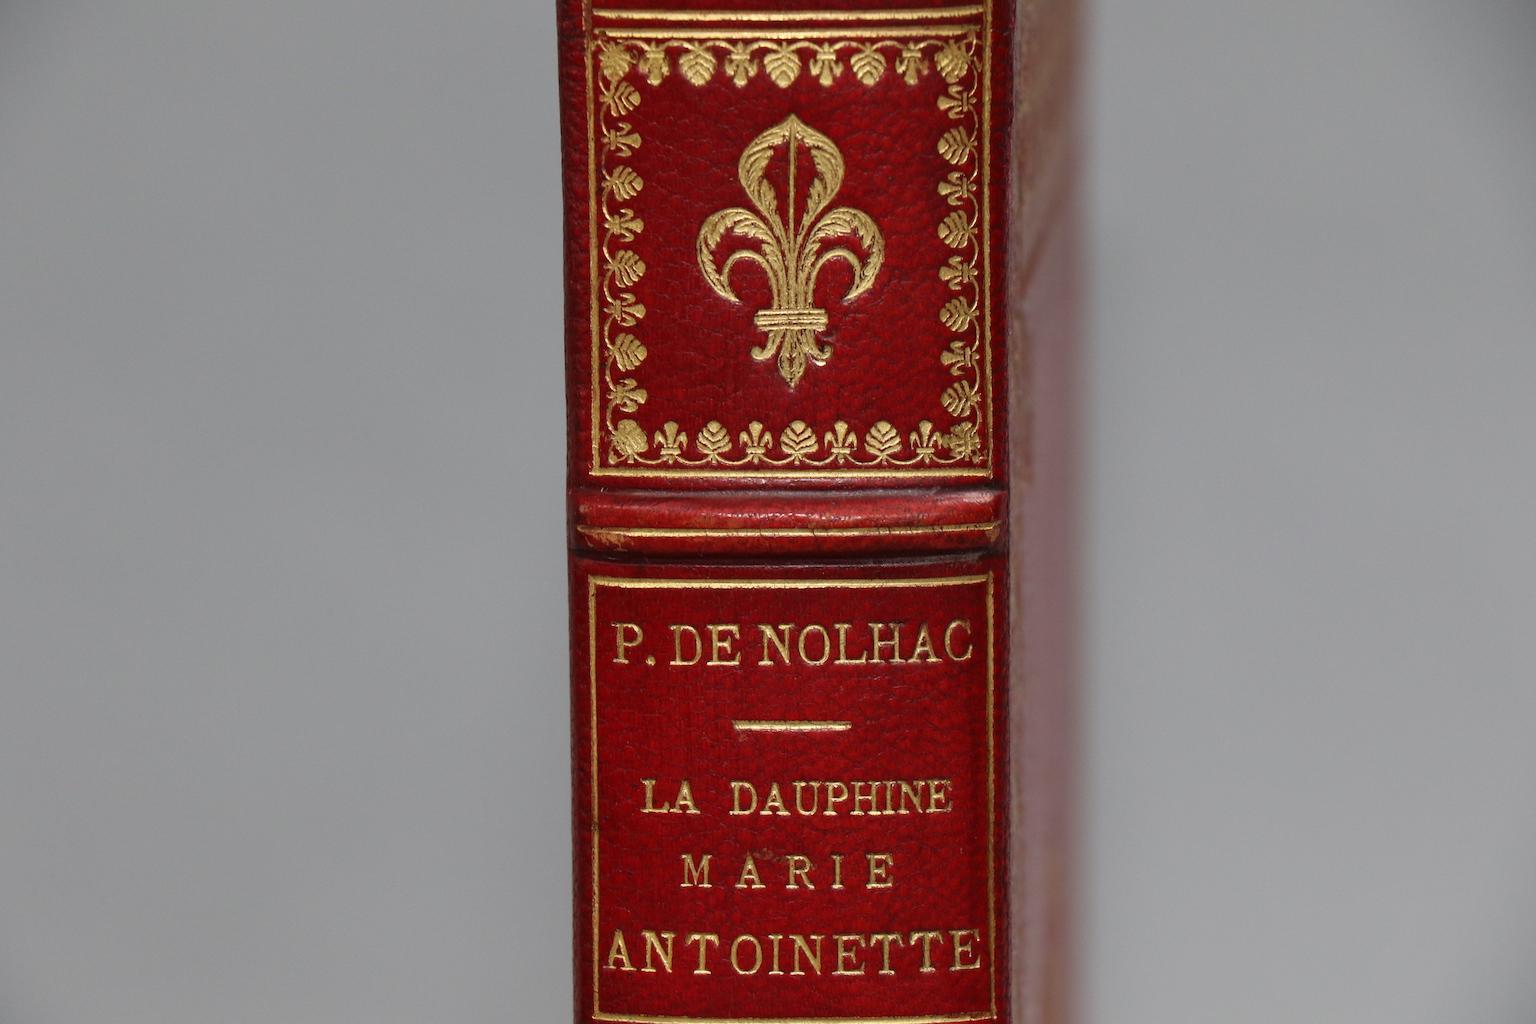 First Edition. Leatherbound. 1 volume. Quarto. Limited to 1000 copies printed on papier vèlin des manufactures du Marais, this is #172. Bound in full red morocco, sides with wide gilt borders nd fleur-de-lys cornerpieces, gilt arms of